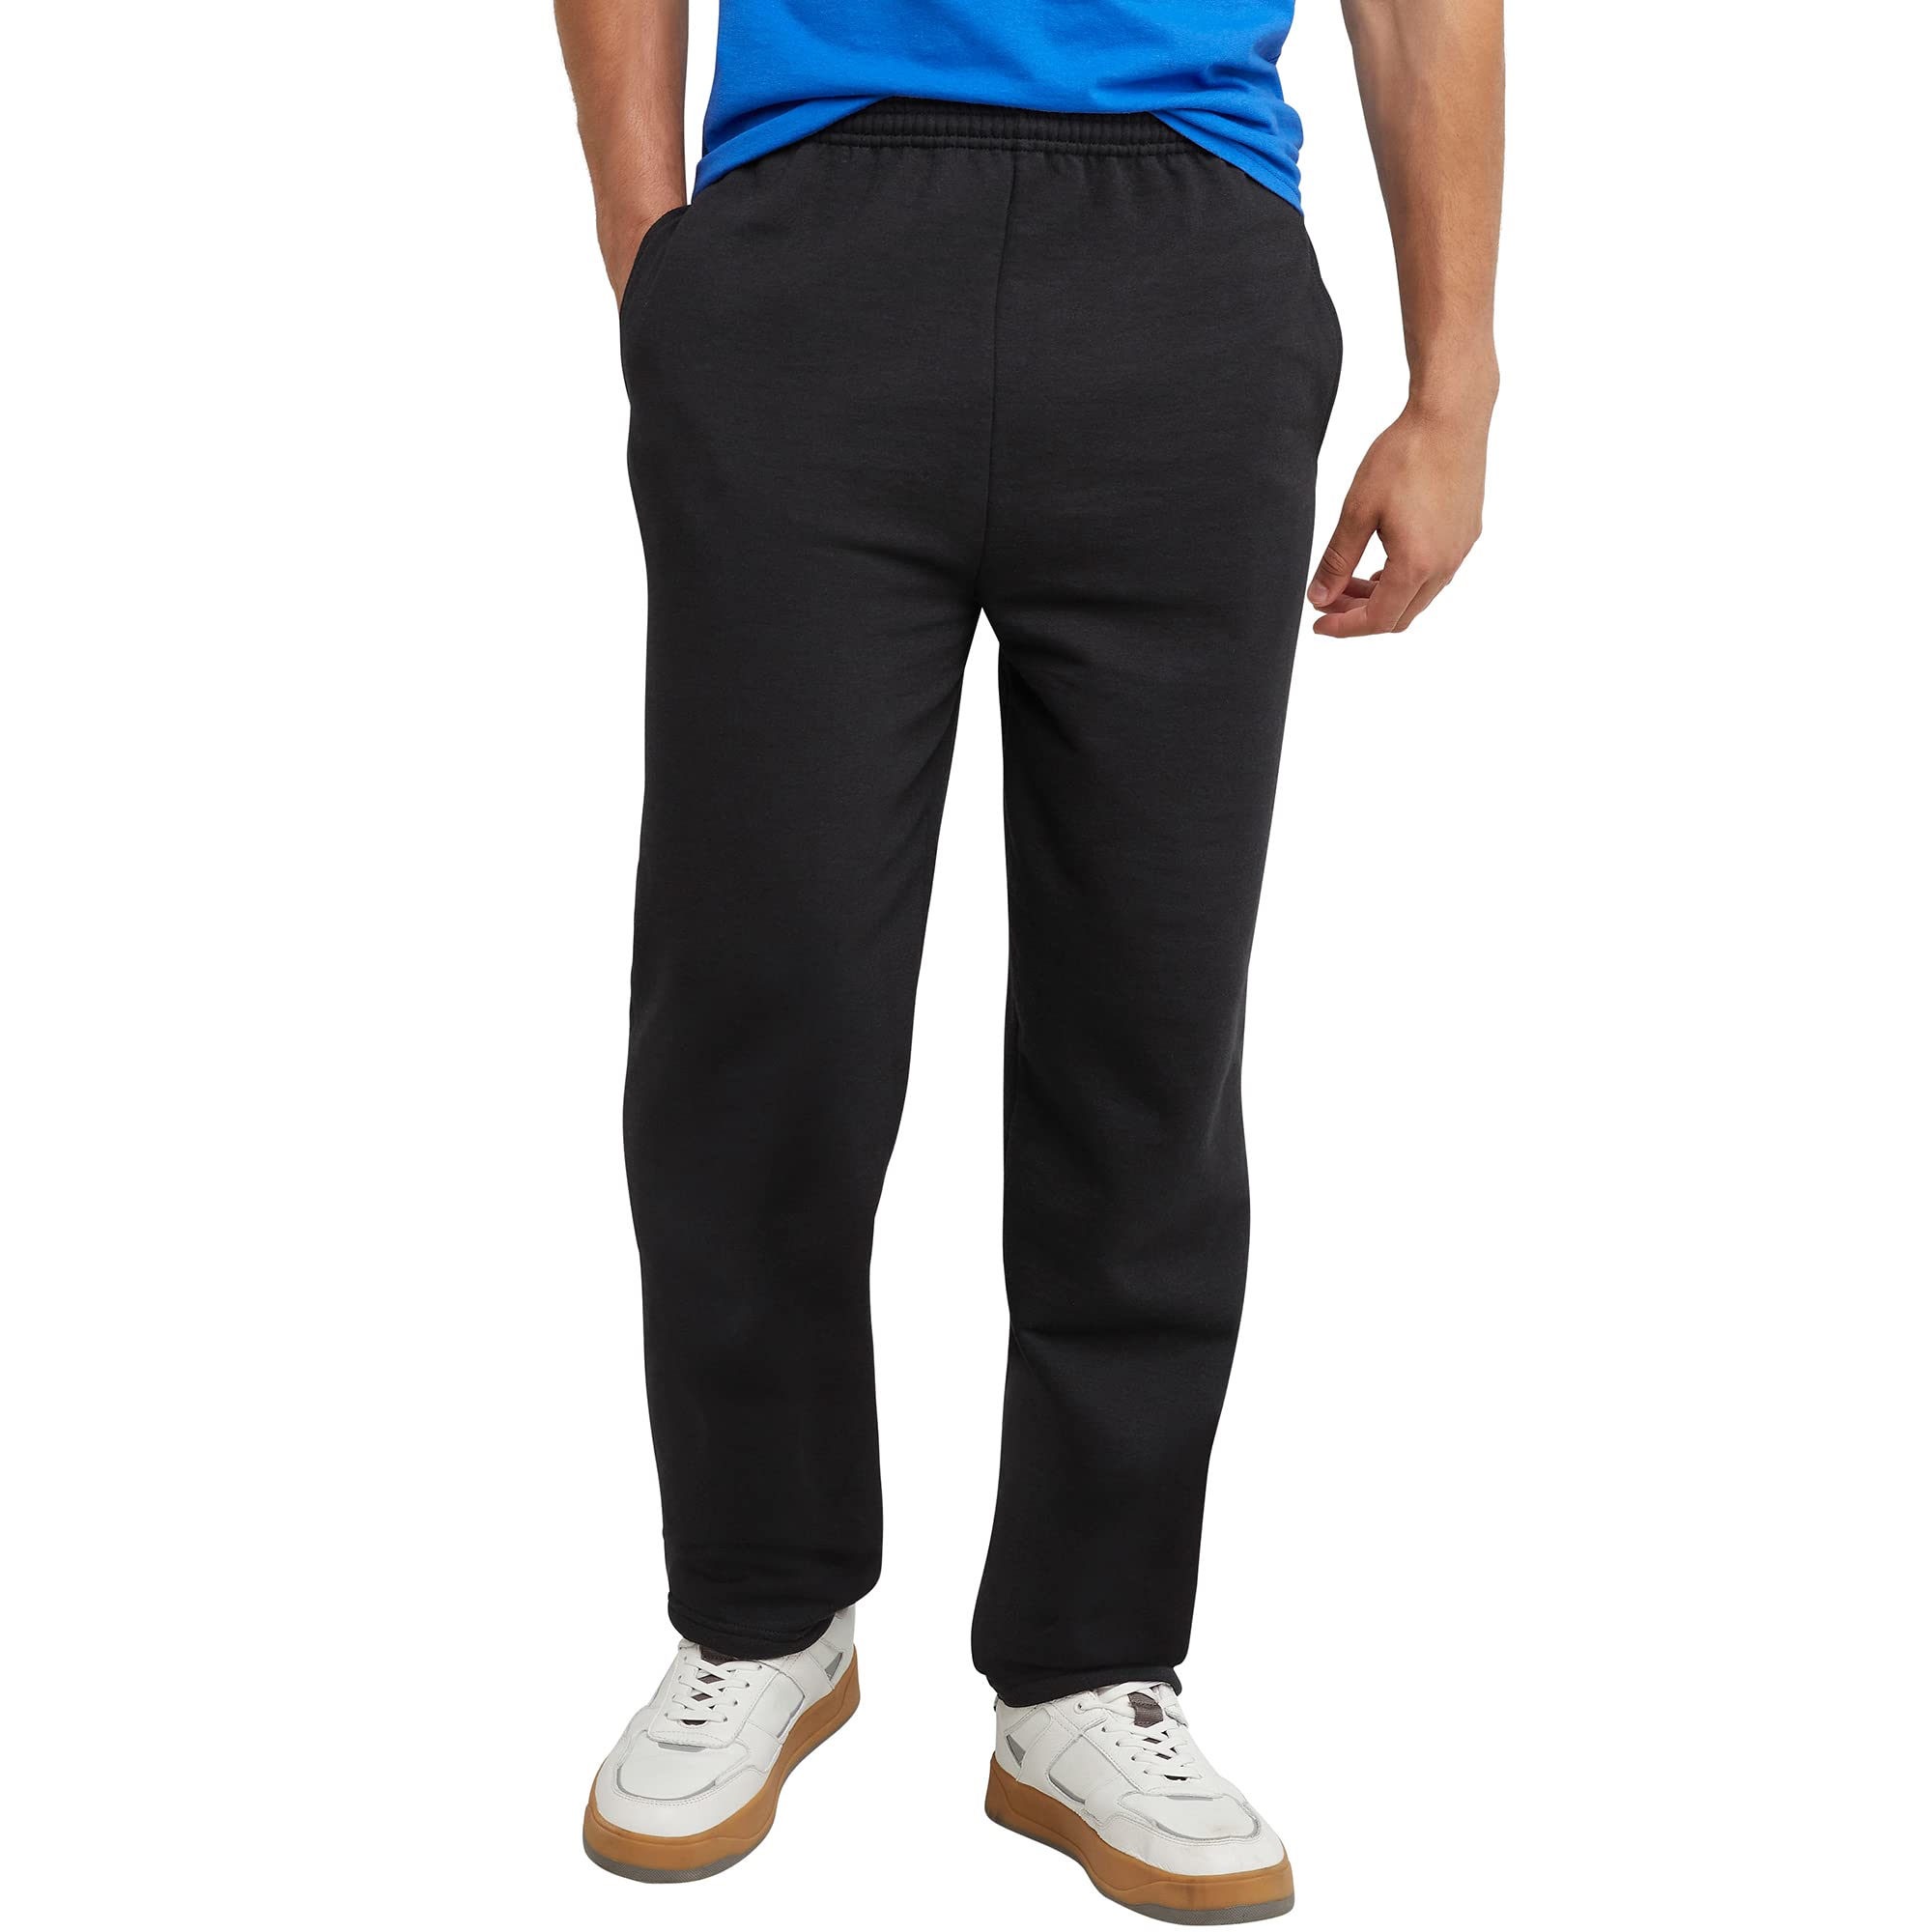 Hanes ComfortSoft EcoSmart Men's Fleece Sweatpants with Pockets (Various) $9.80 + Free Shipping w/ Prime or on $35+